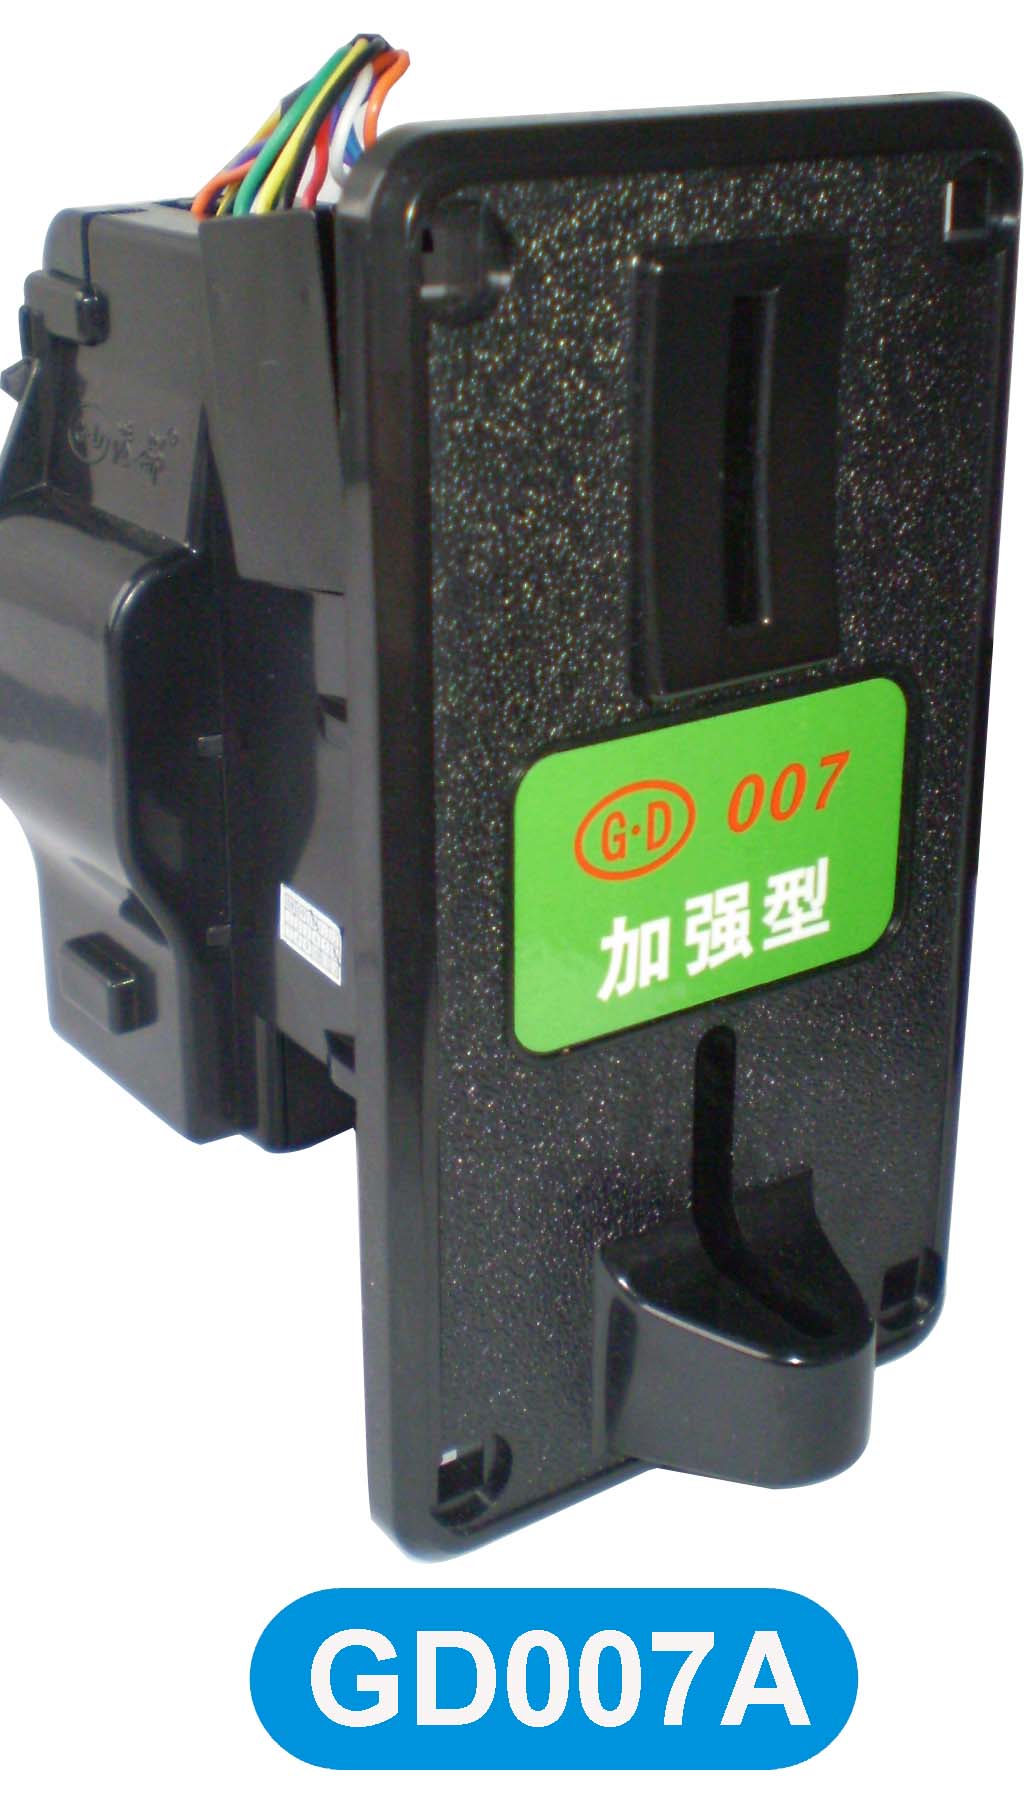 GD007A GD Intelligent coin acceptor  ,coin selector validators